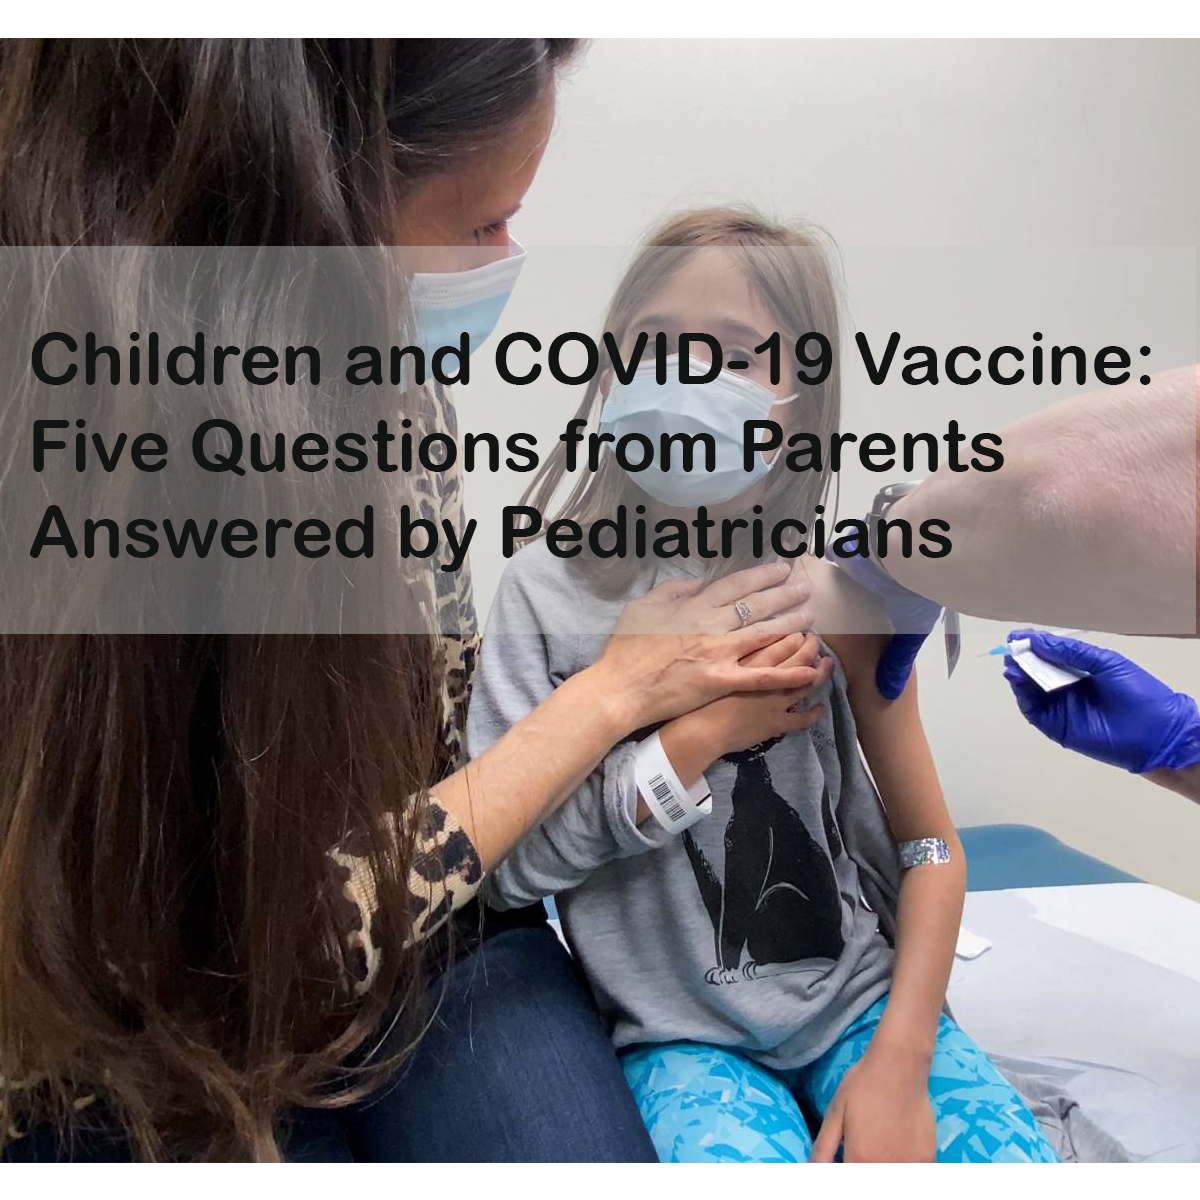 Children and COVID-19 Vaccine: Five Questions from Parents Answered by Pediatricians